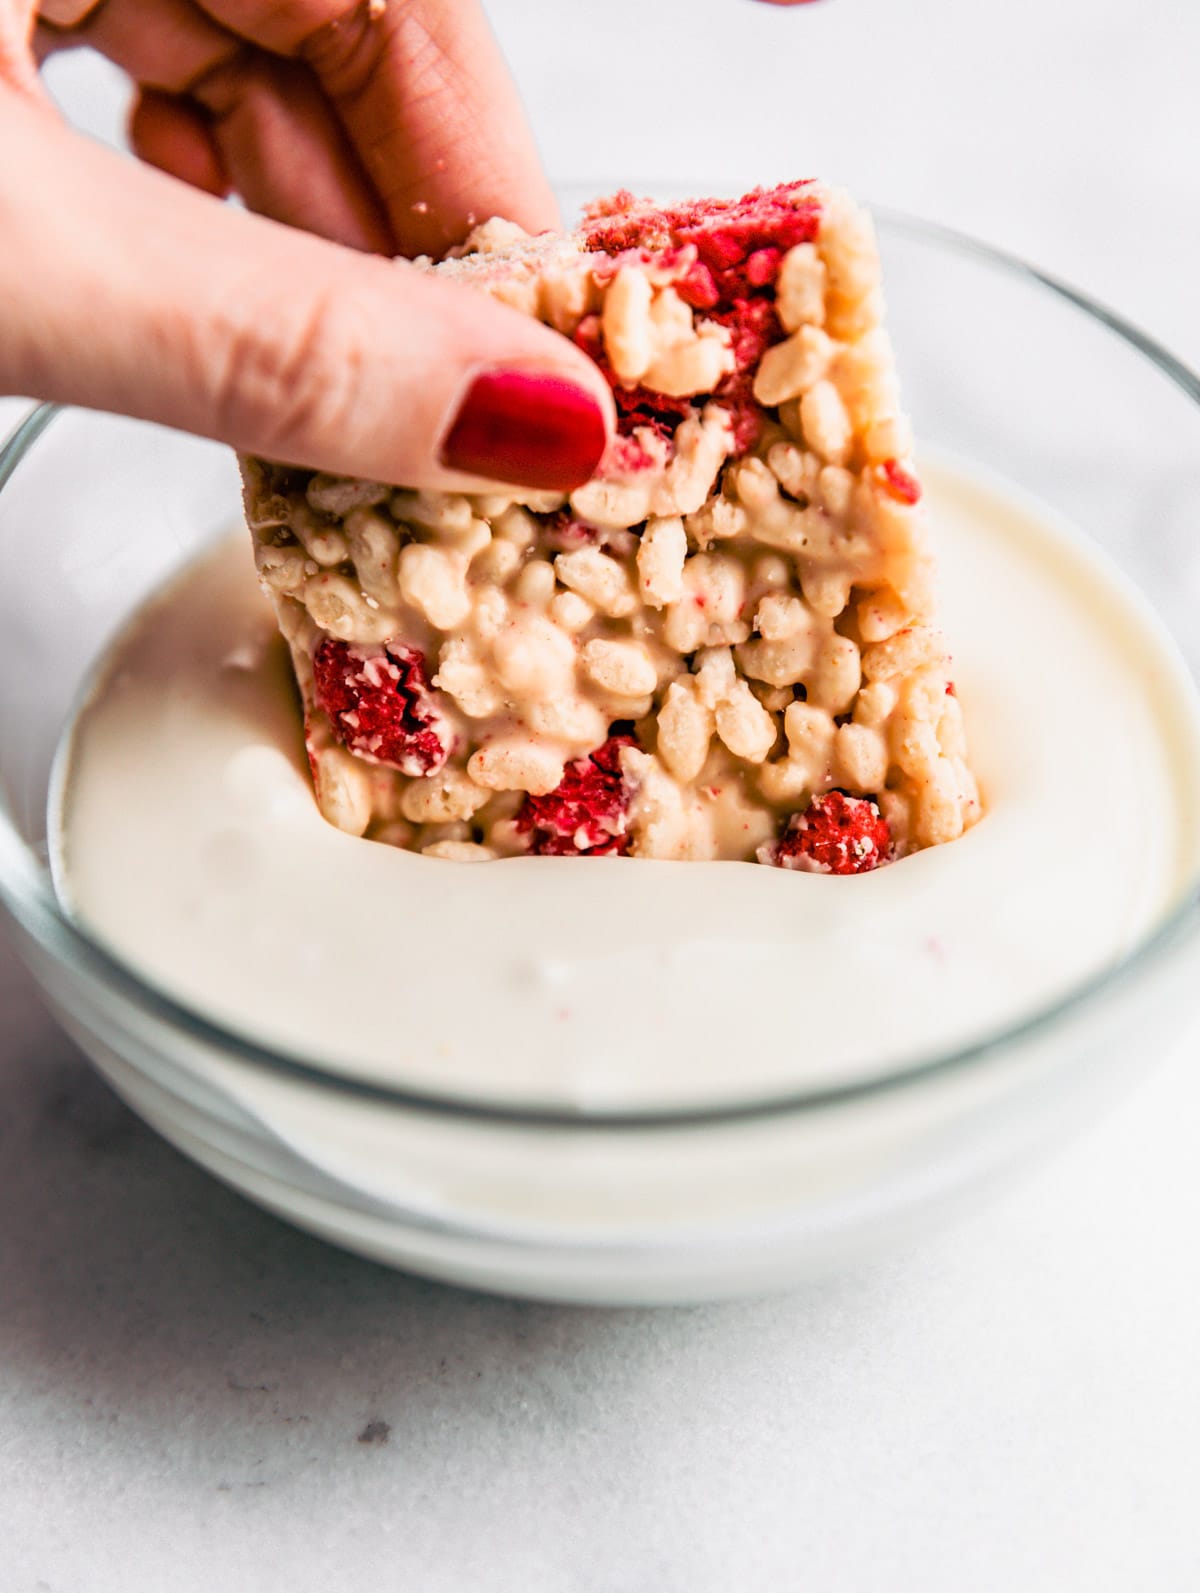 A woman's hand dipping a white chocolate raspberry rice crispy bar into melted chocolate.